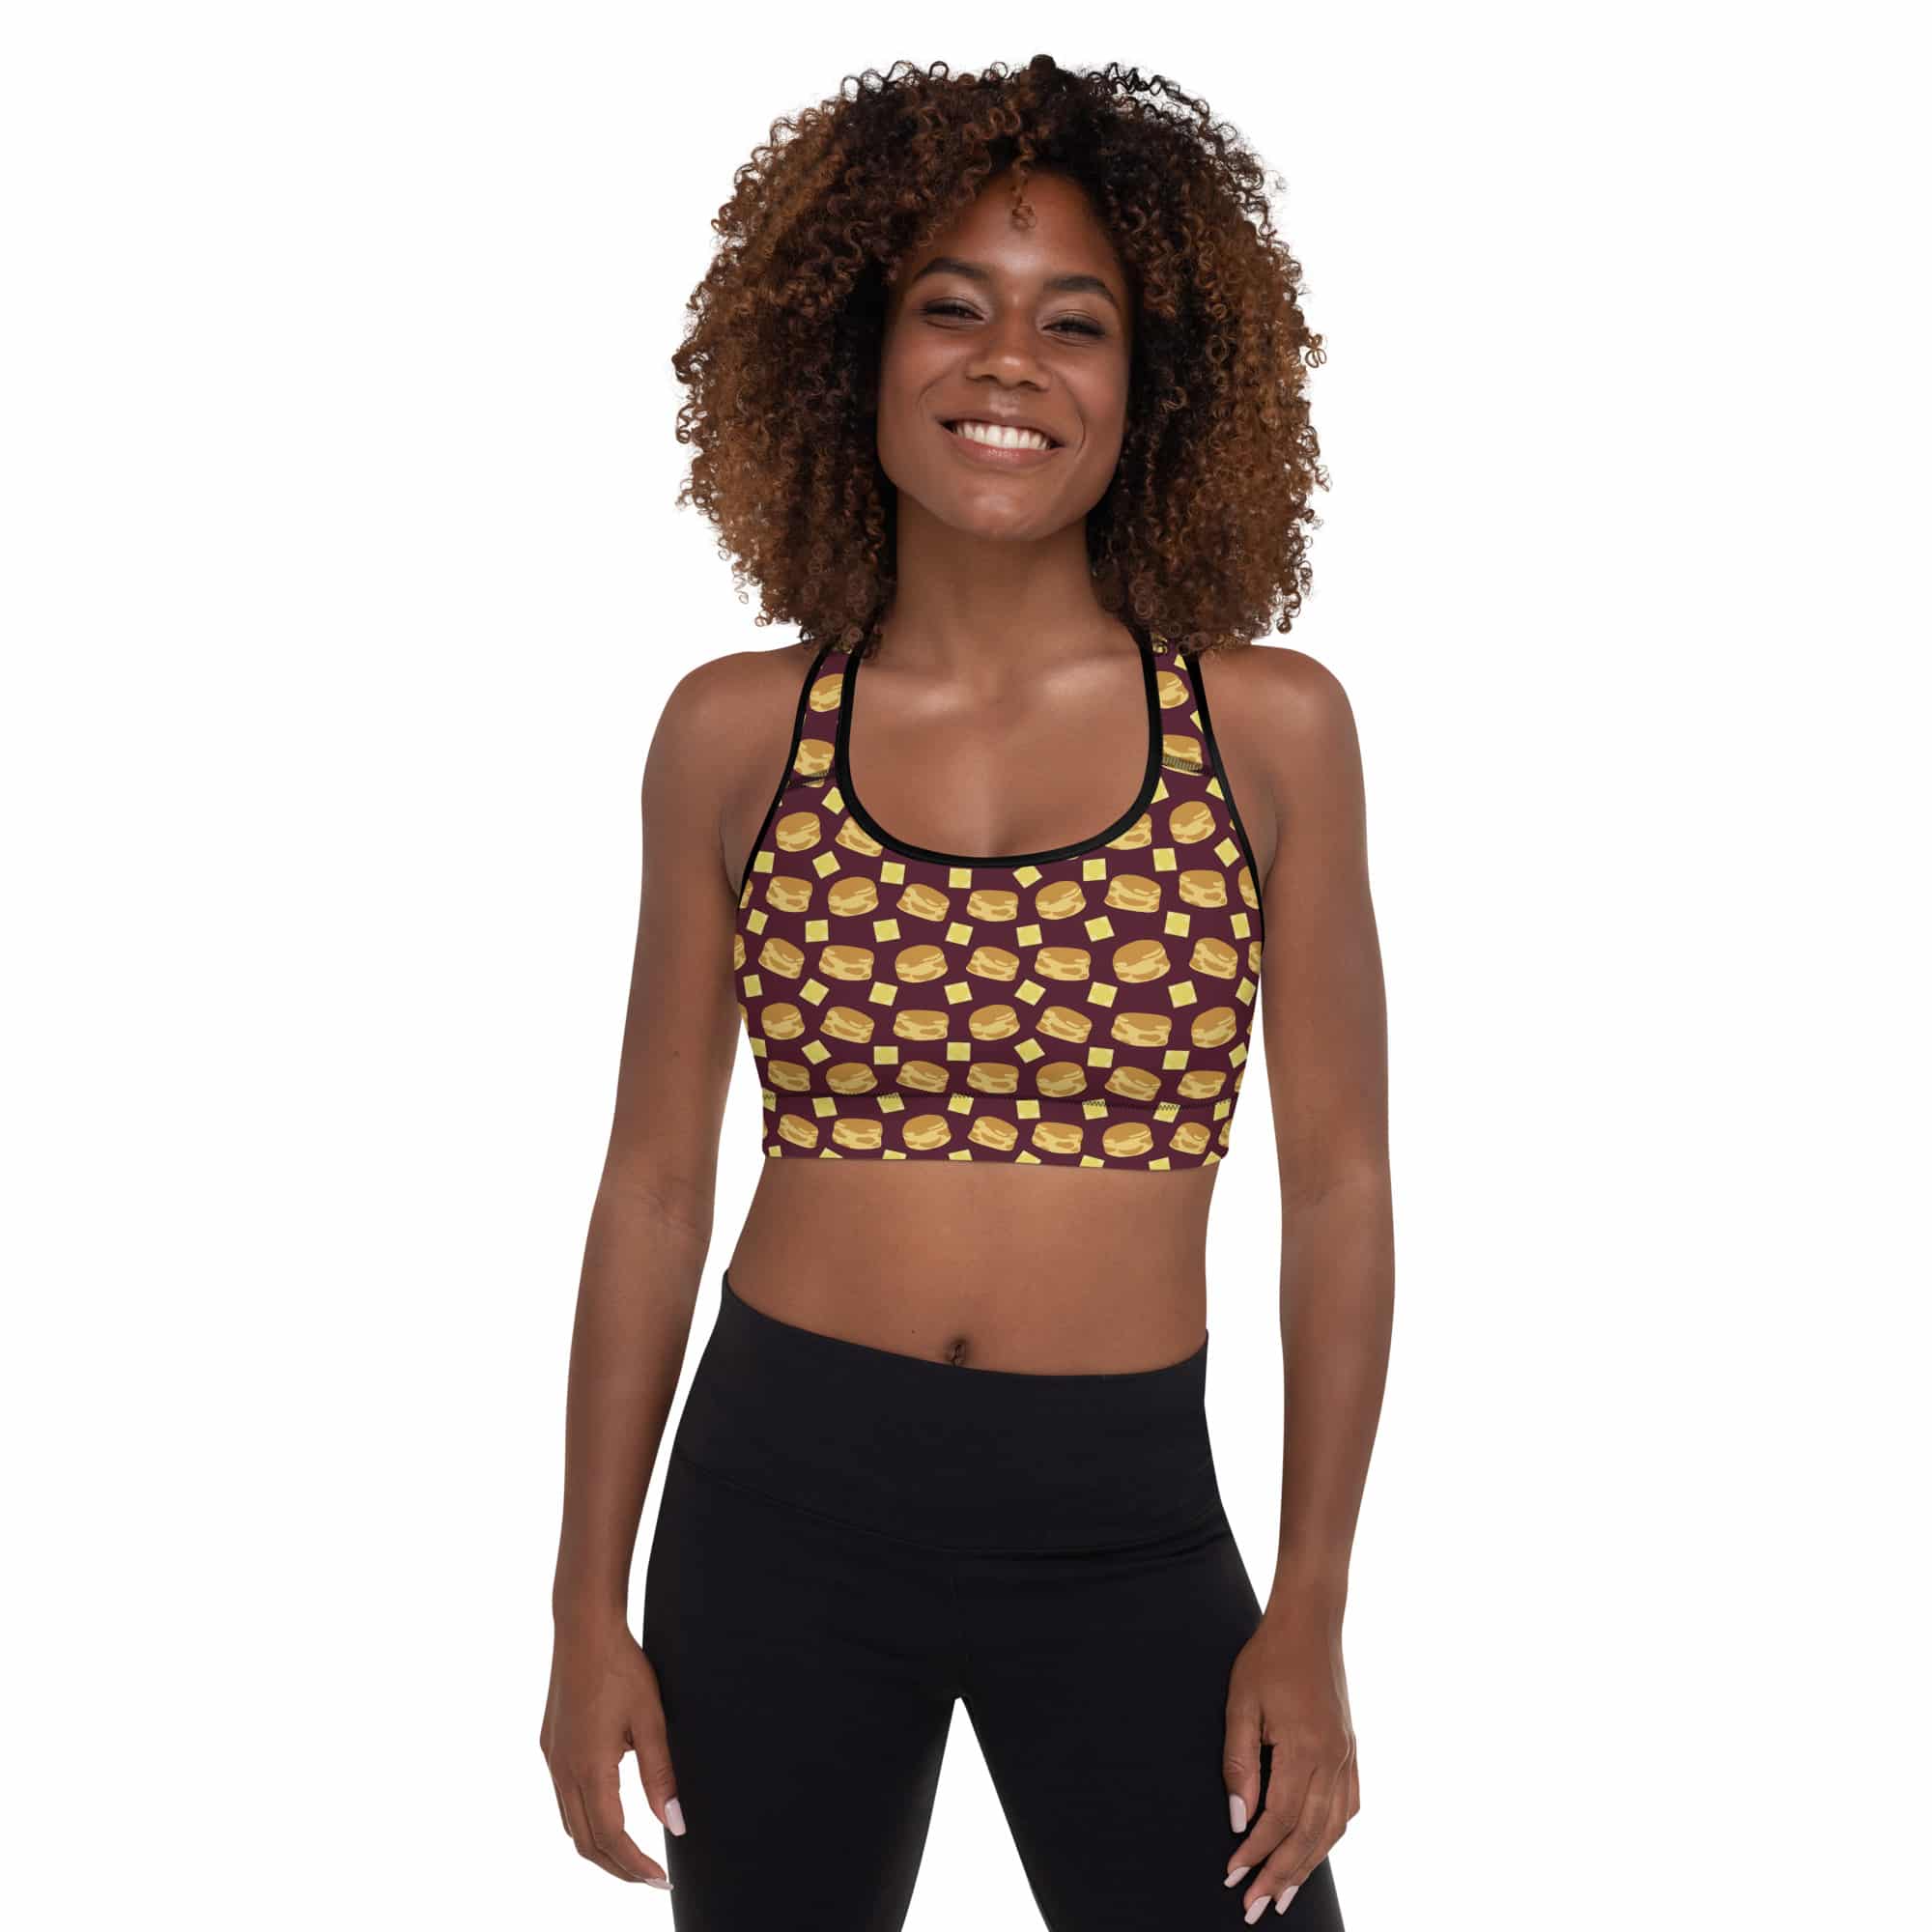 Buttermilk Biscuits Sports Bra Padded - Uncover West Virginia